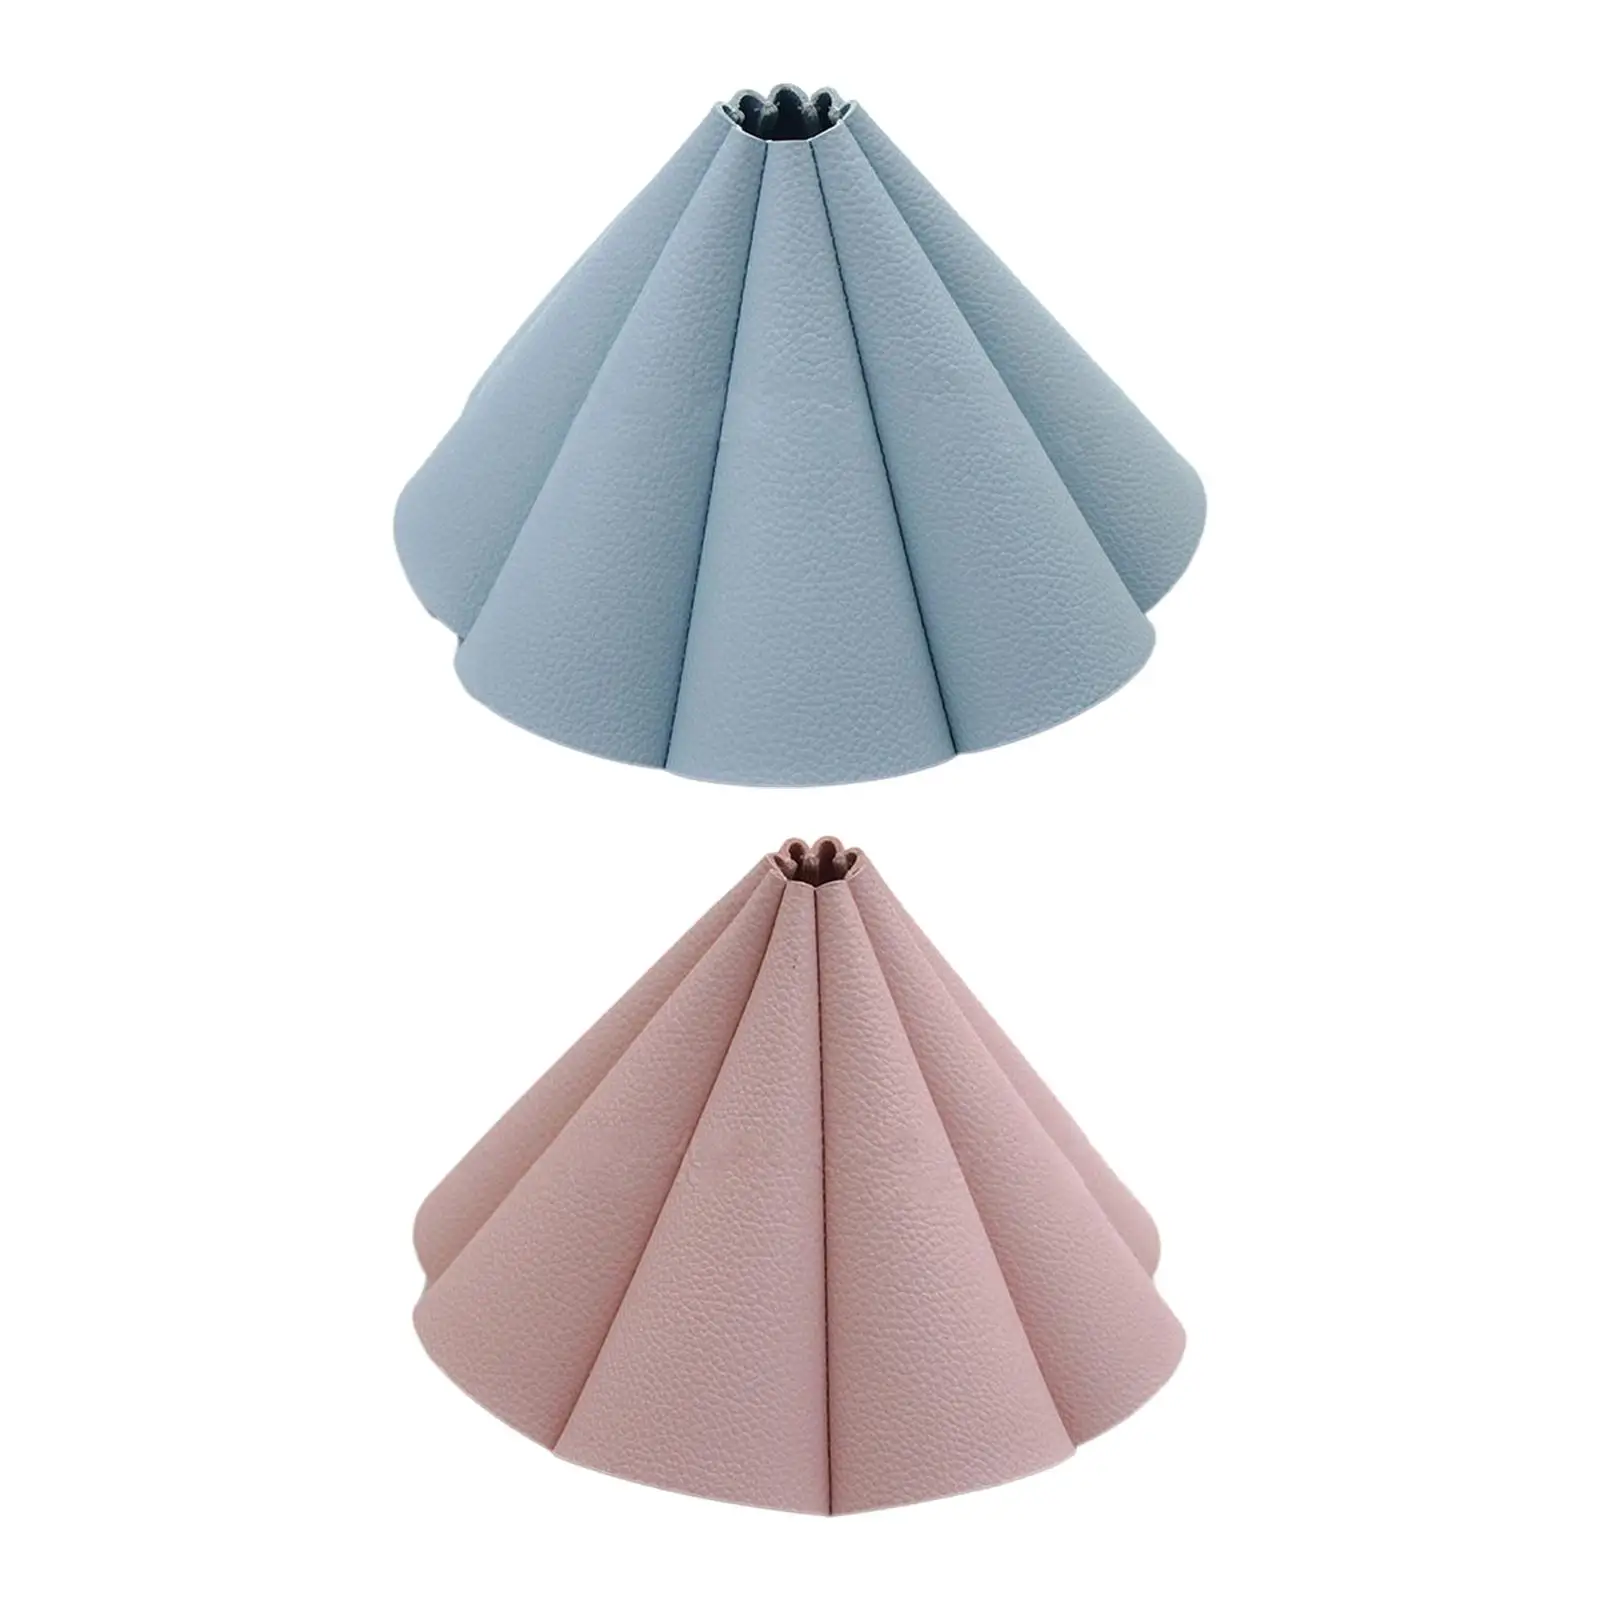 Waterproof Ornament Fashion Lamp Cover Replacement Detachable Dust Proof Durable Lamp Shade for Camping Home